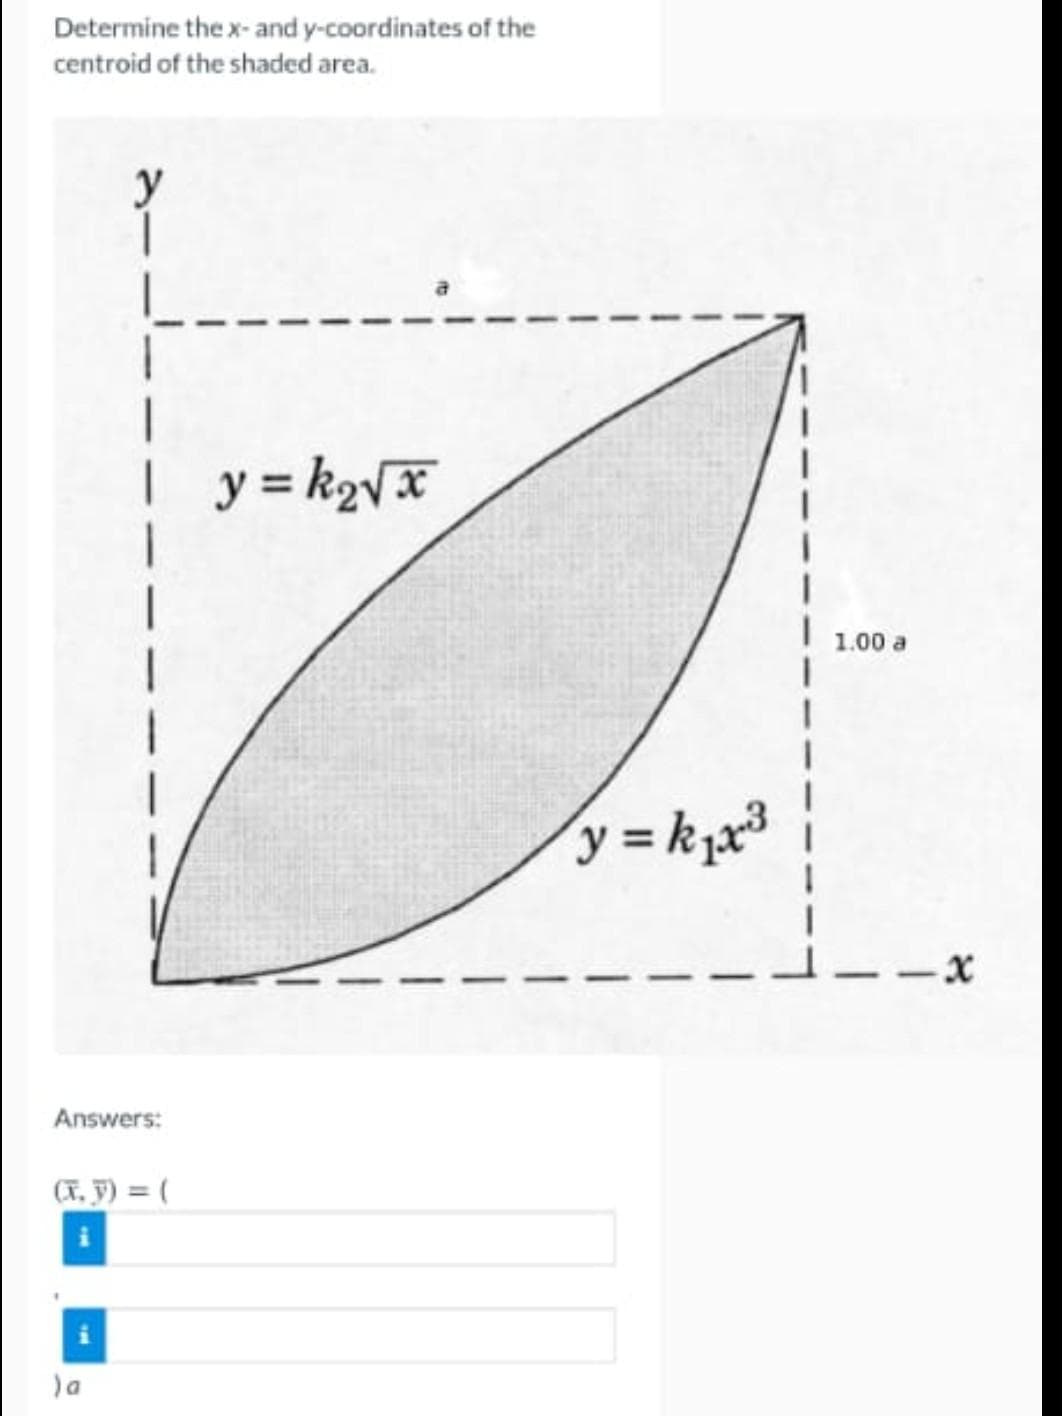 Determine the x- and y-coordinates of the
centroid of the shaded area.
y
y = k2yx
1.00 a
y = k,x³
–-X
Answers:
(T. F) = (
)a
